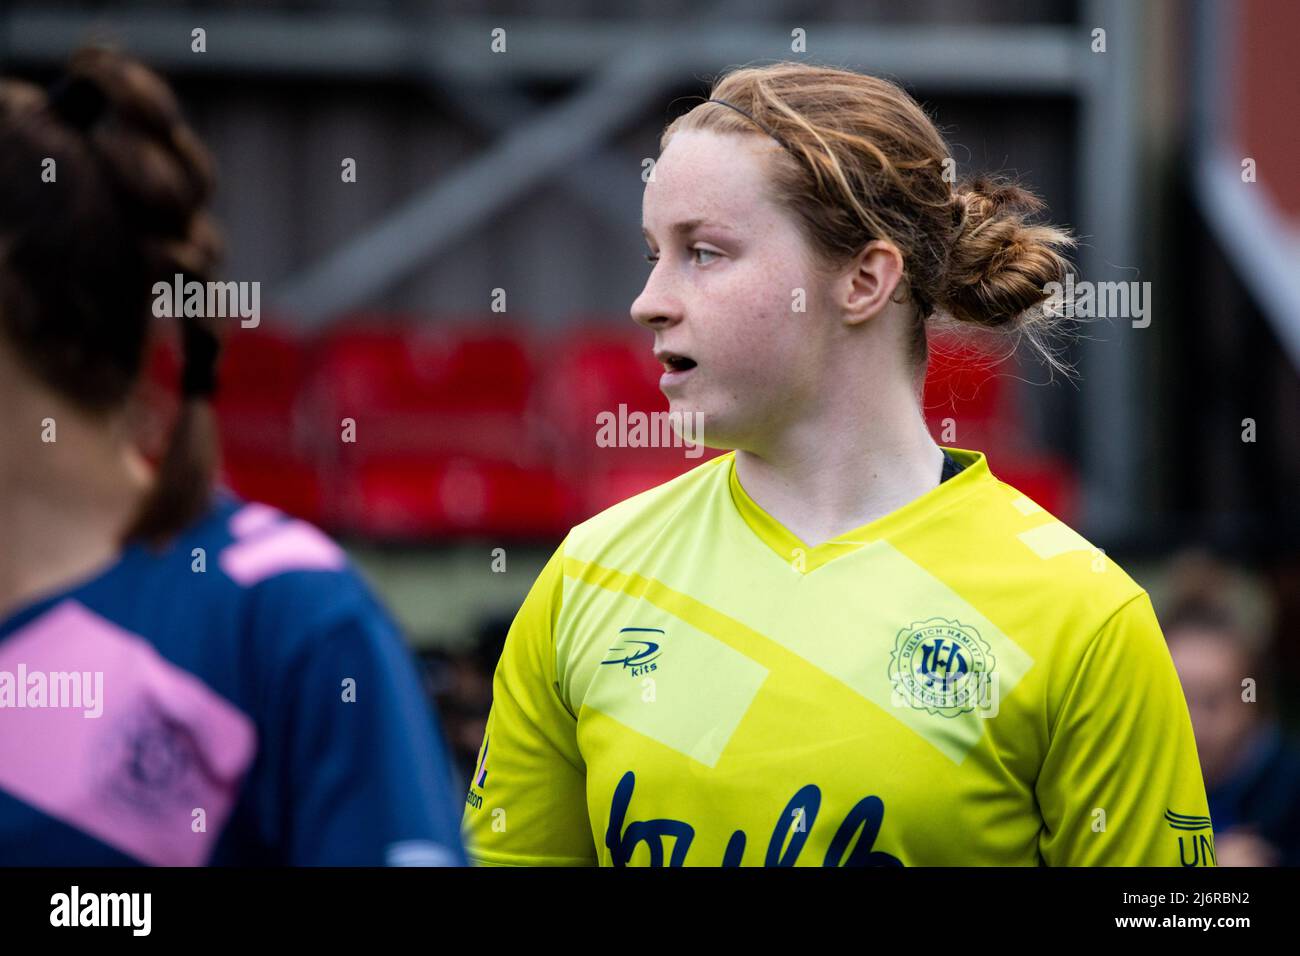 London, England. 03/05/2022, Goalkeeper Rebecca Sargent (1 Dulwich Hamlet) prior to the Capital Womens Senior Cup game between Ashford (Middlesex) and Dulwich Hamlet at Meadowbank in London, England.  Liam Asman/SPP Stock Photo